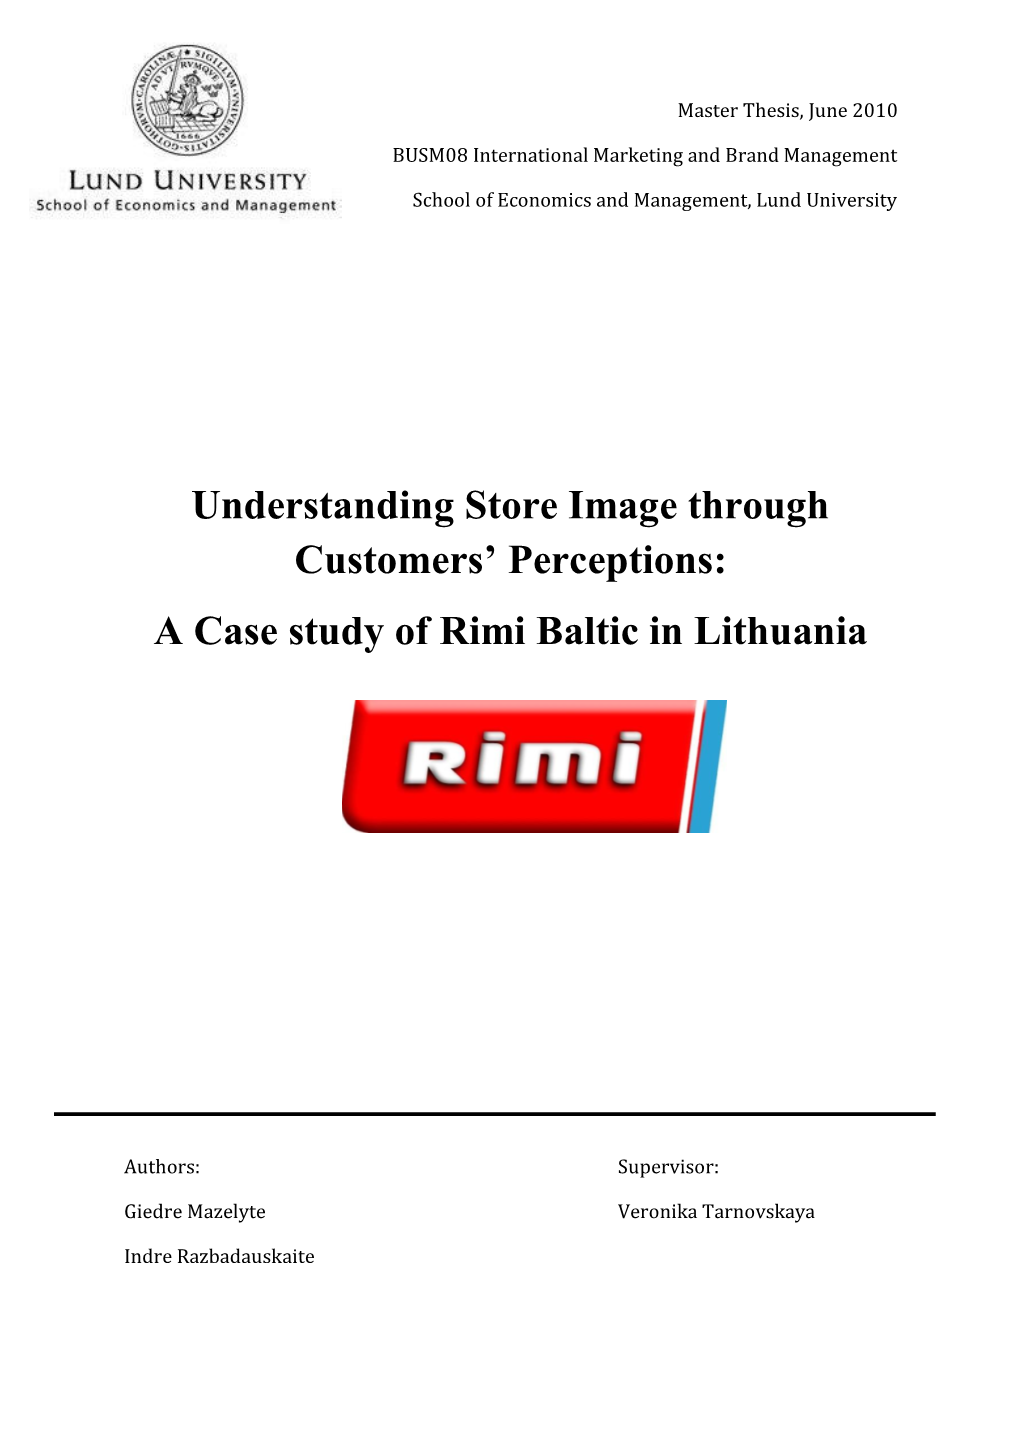 A Case Study of Rimi Baltic in Lithuania